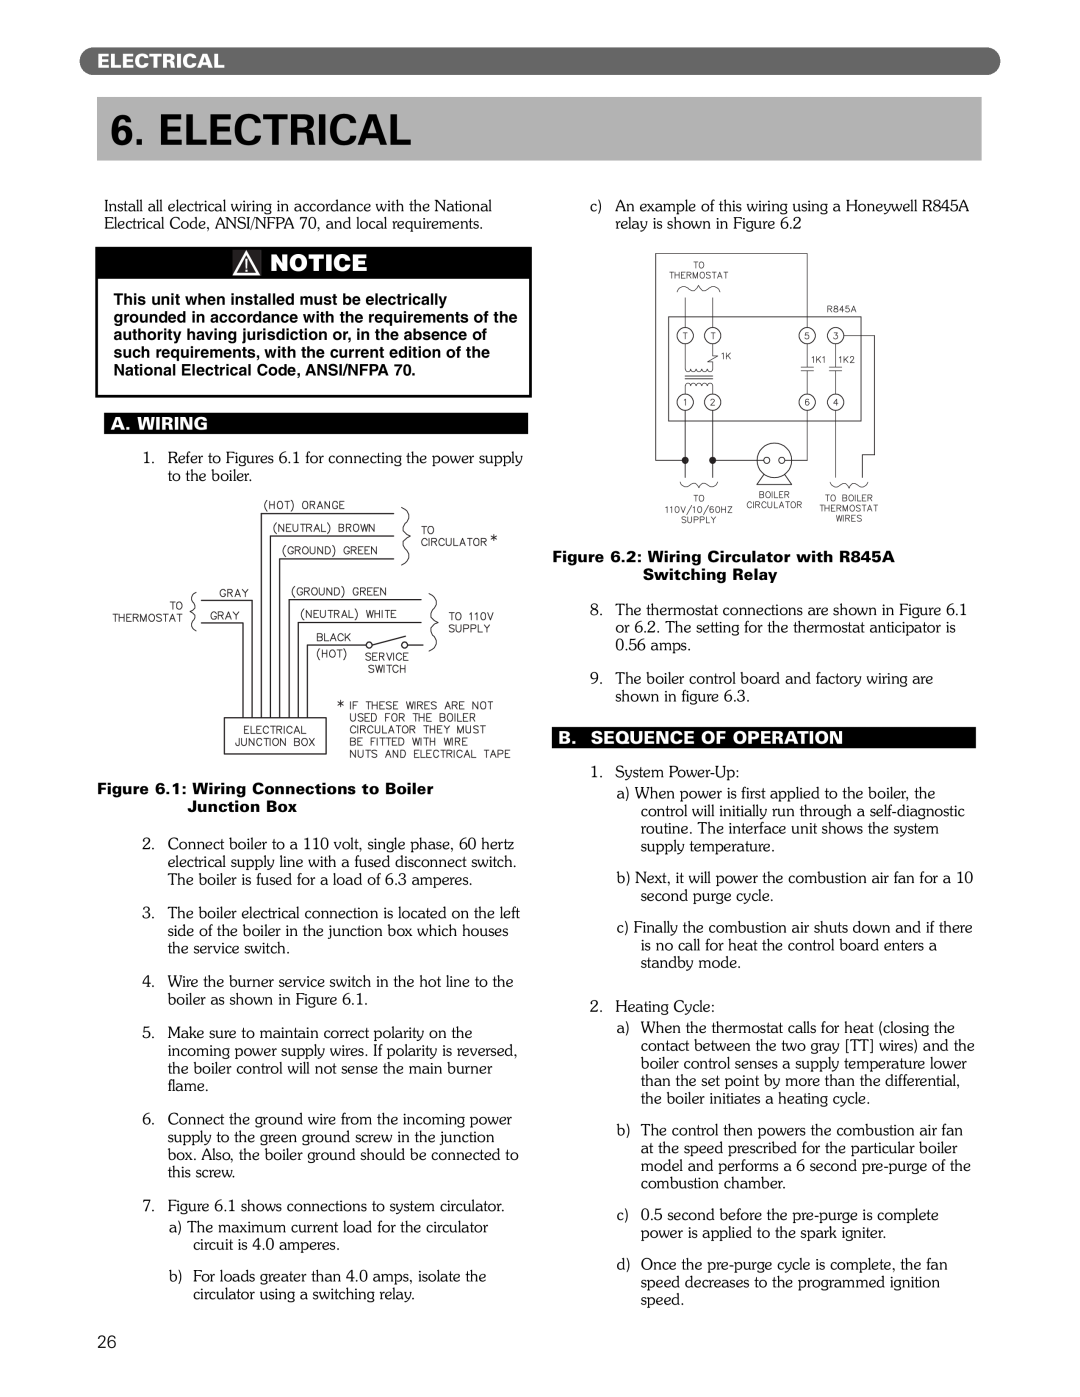 PB Heat Gas Boiler manual Electrical, A.Wiring, B.Sequence Of Operation 